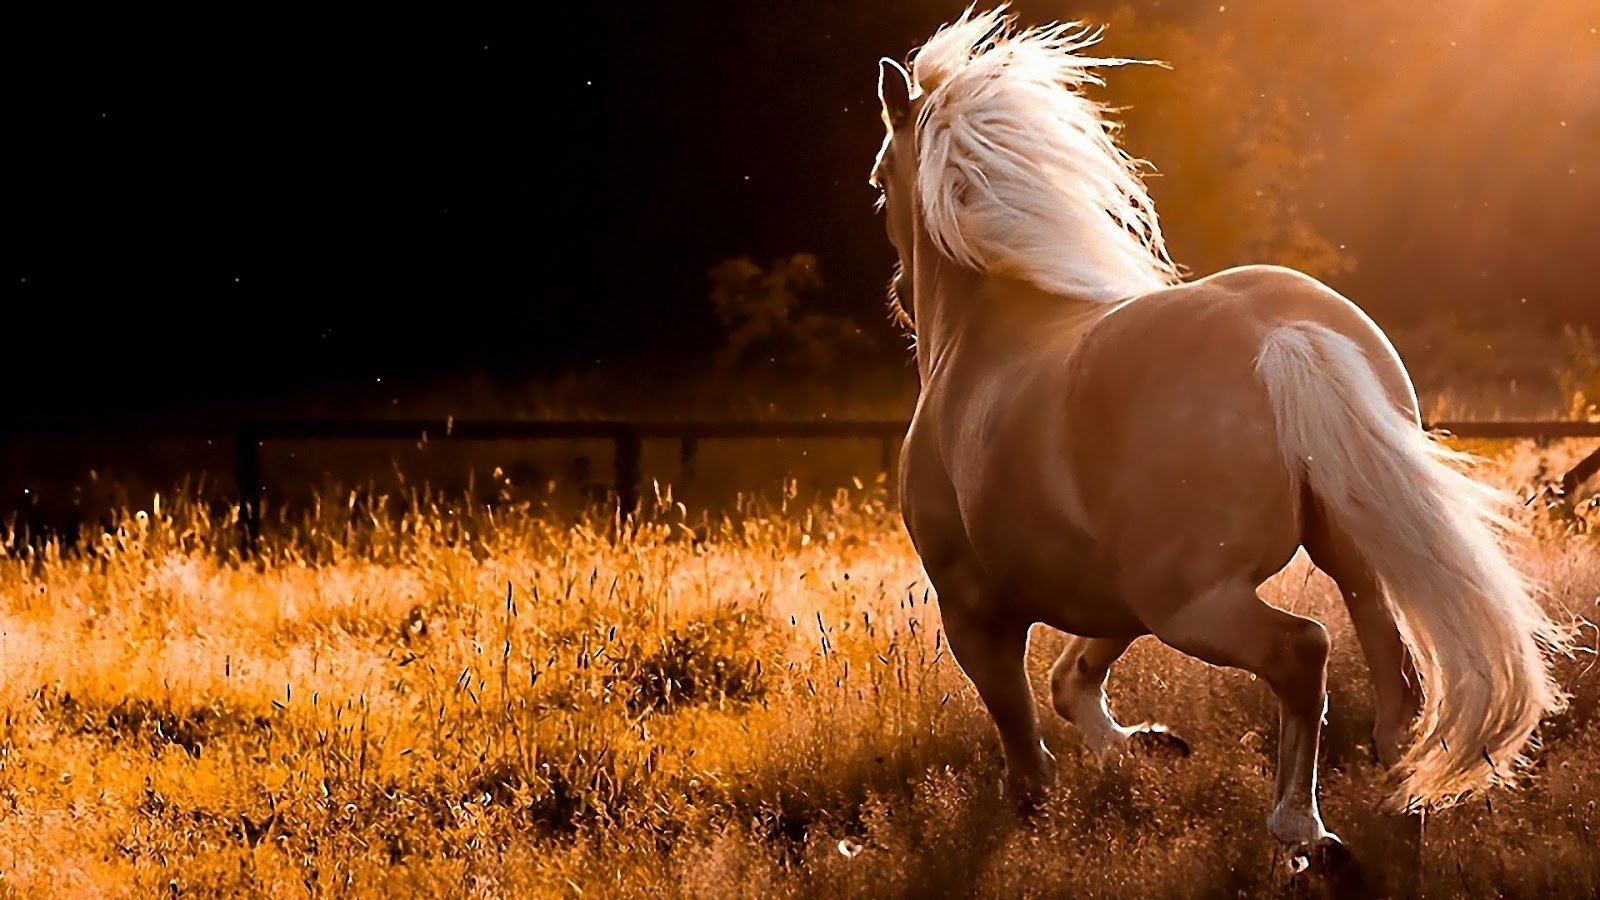 All Wallpapers Beautiful Horse Hd Wallpapers 2013 1600x900